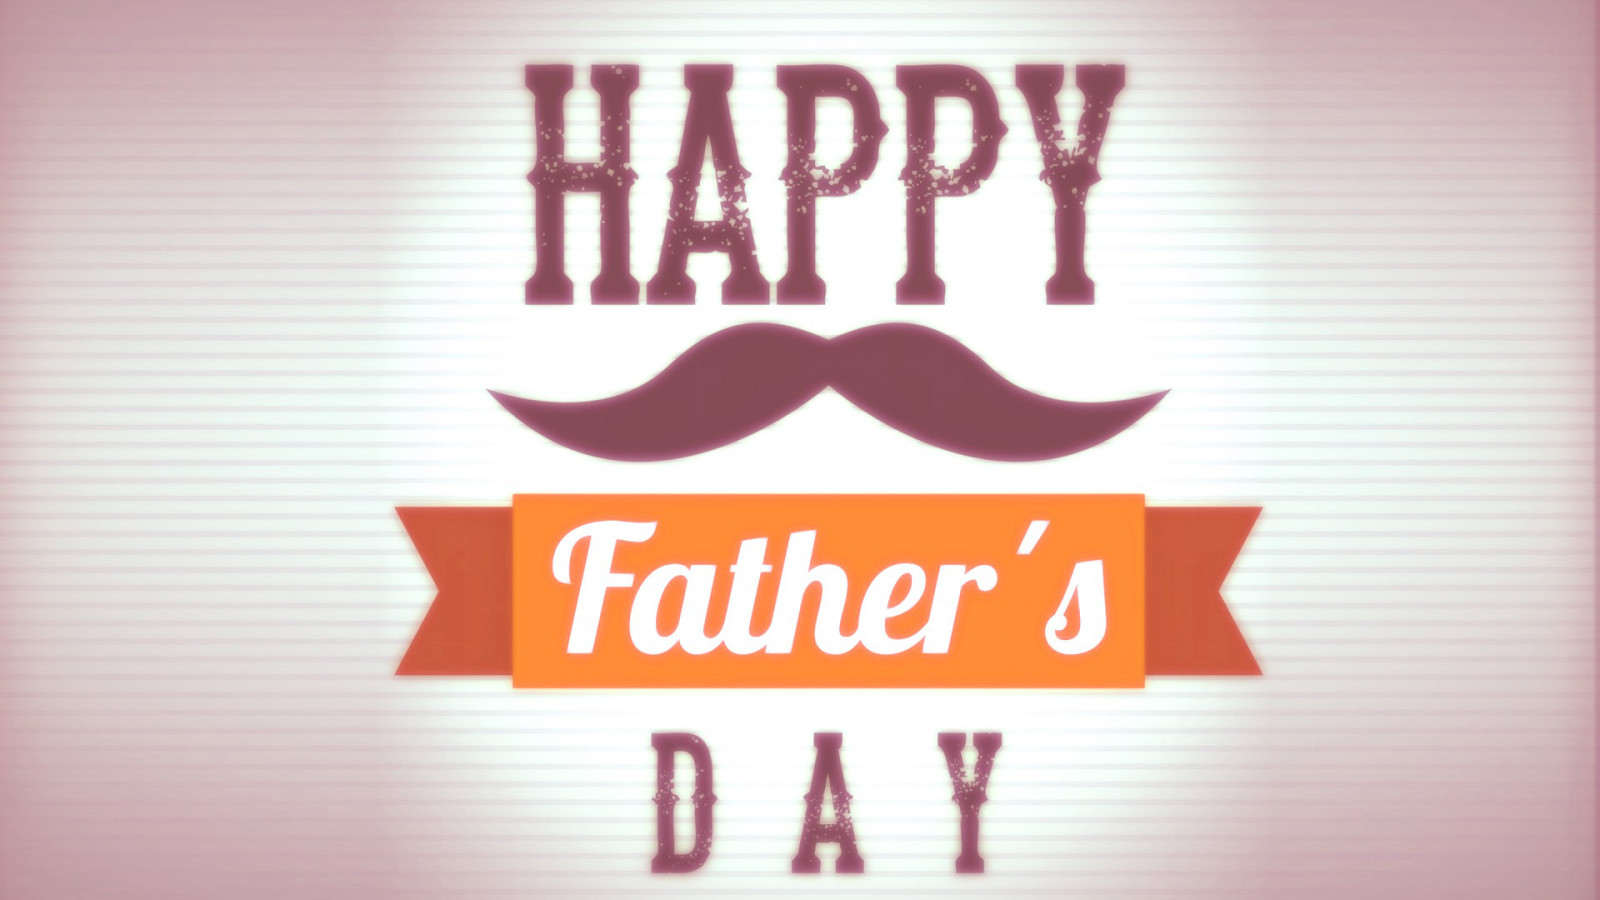 Happy Fathers Day Quotes Sayings Wishes Messages SMS Greetings